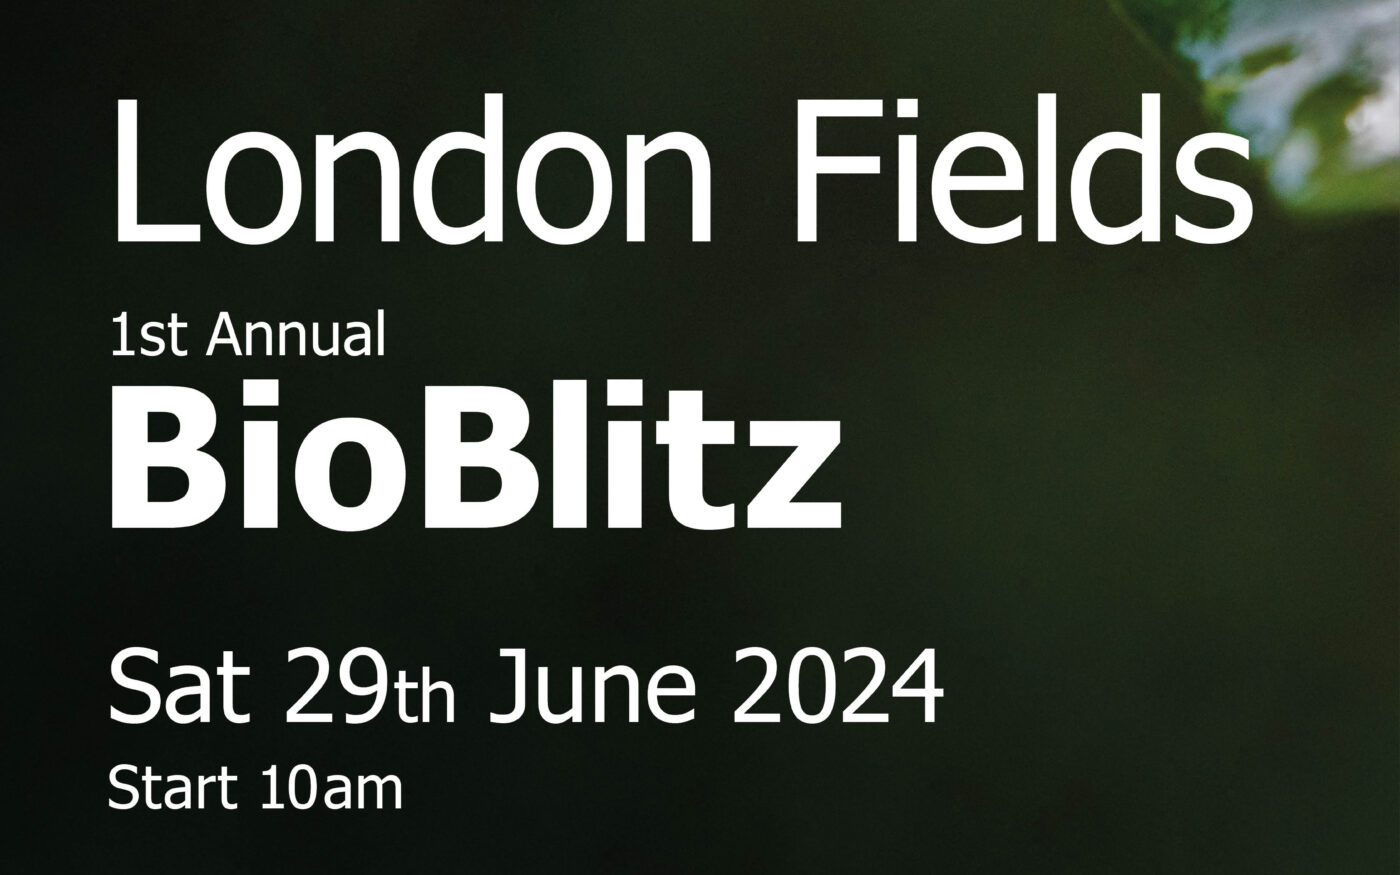 Flyer for BioBlitz event in London Fields depicting a snail on leaf